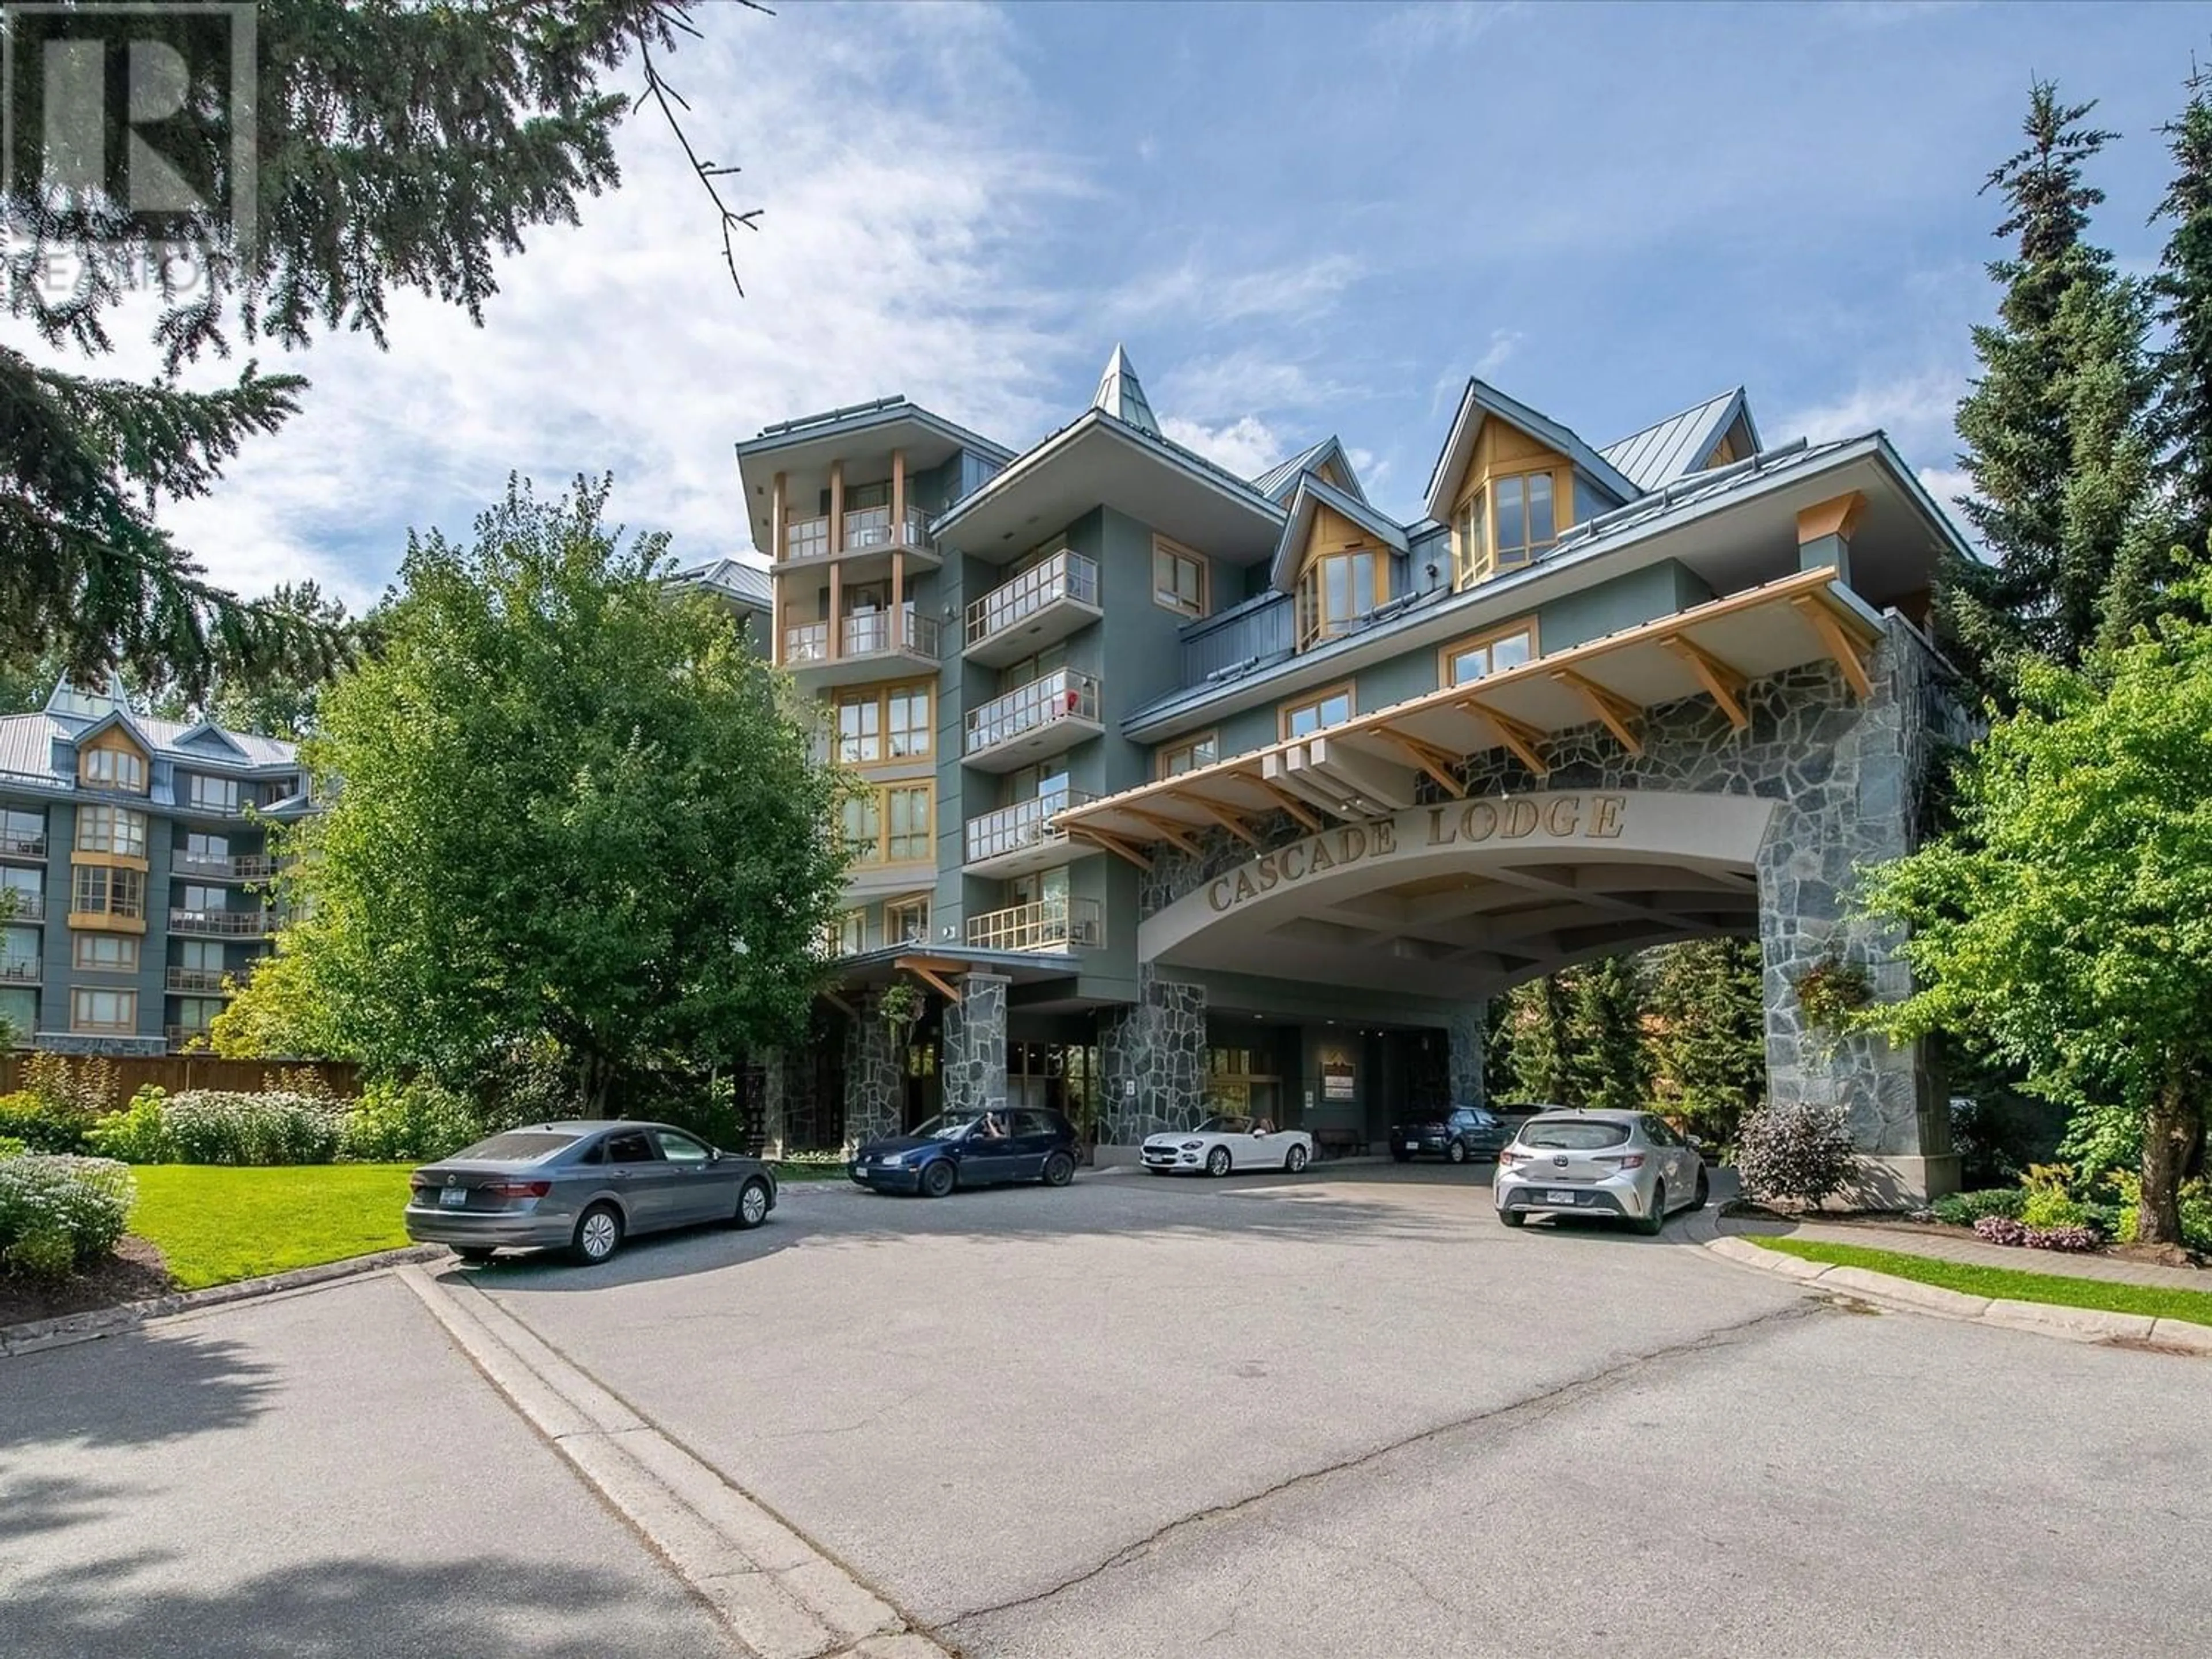 A pic from exterior of the house or condo for 411 4315 NORTHLANDS BOULEVARD, Whistler British Columbia V8E1C1